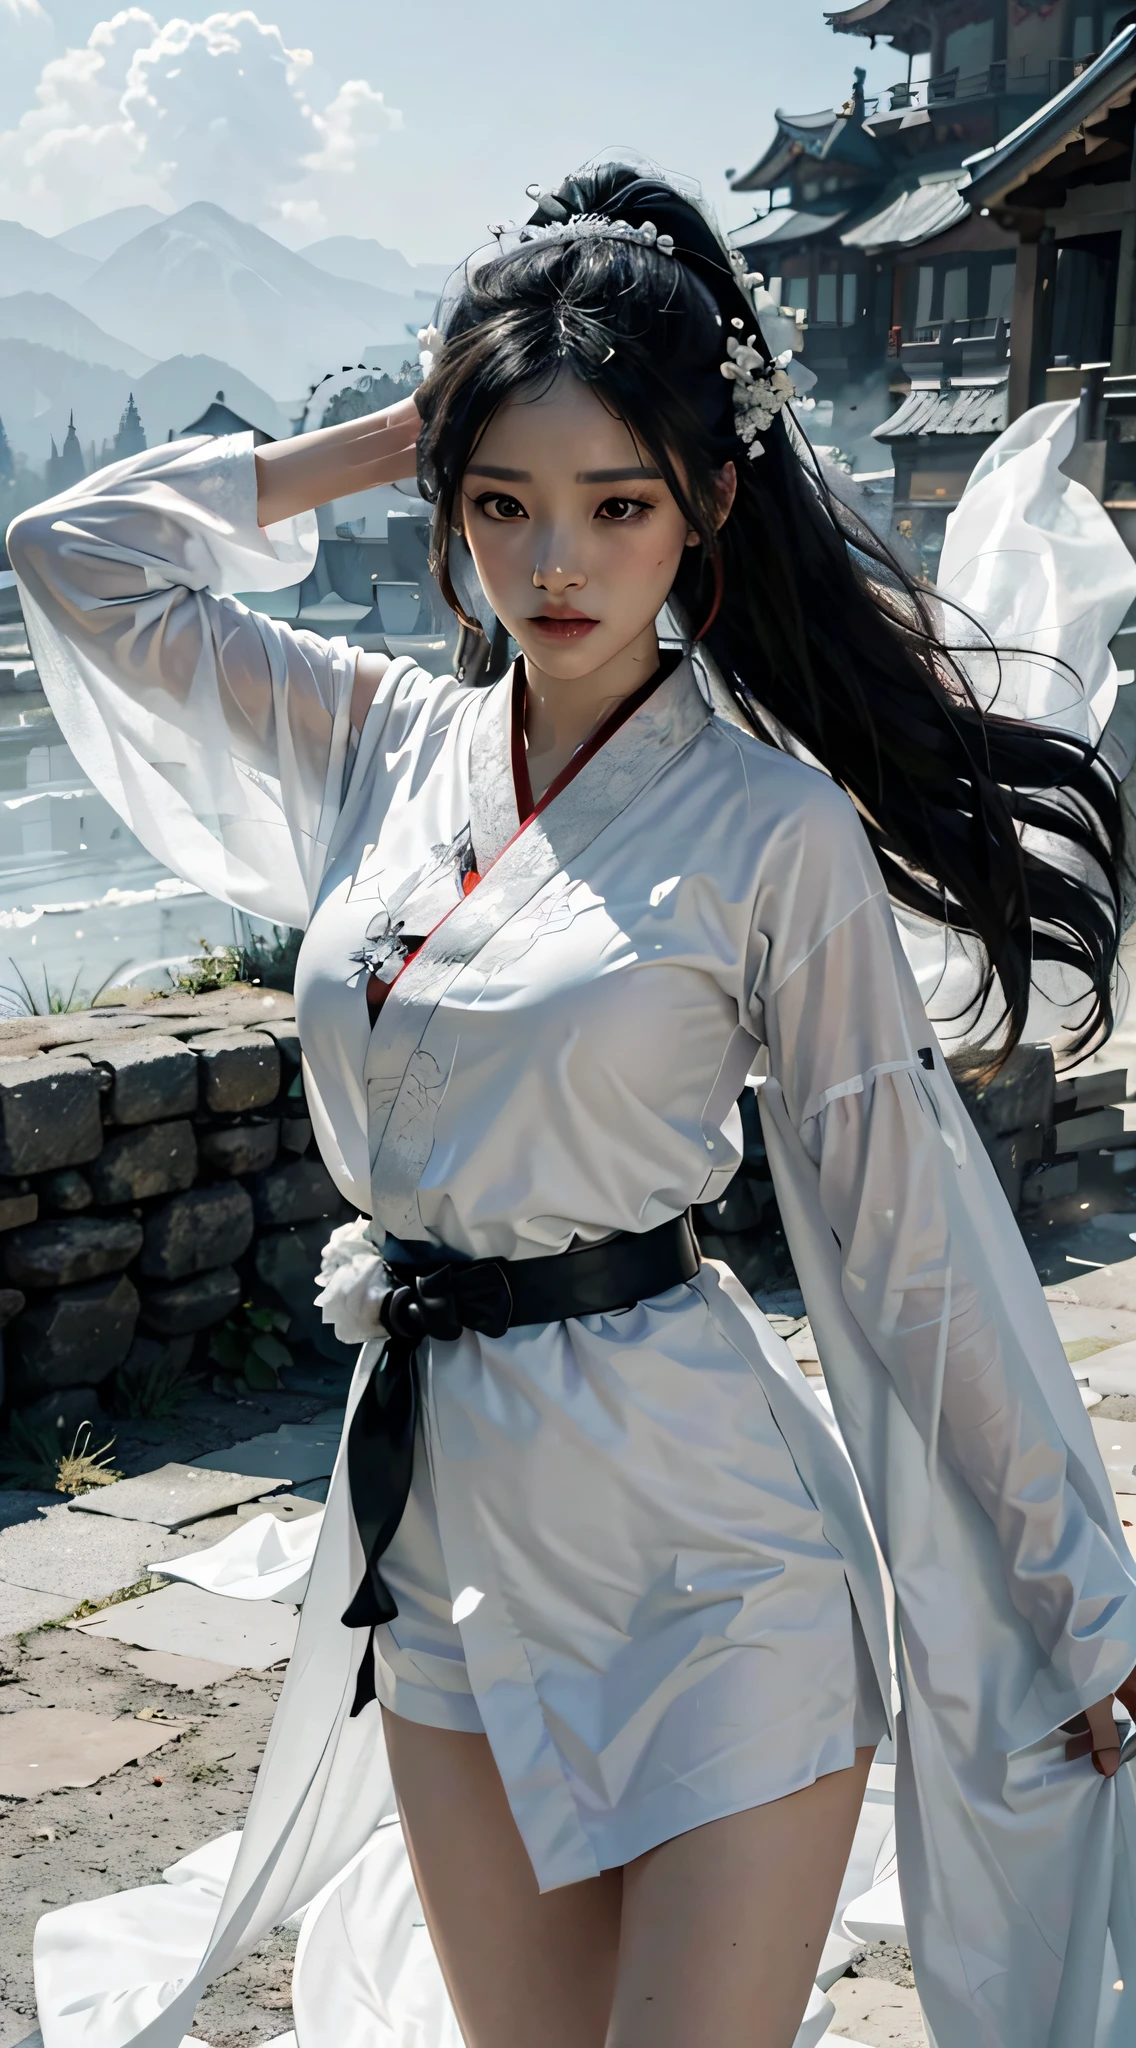 8k wallpaper, volumetric lighting, dynamic lighting, a girl, (white veil fluttering in the wind), (white hanfu robe, black embroidery), black ponytail long hair, long hair flowing, black hair, fringed hair ornaments, peony, ancient style, red belt, dynamic pose, dramatic composition, petals falling, red belt, ancient architectural background, complex background, cloud and mist entanglement, fairy tale background, cloudy and mist, movie lighting,